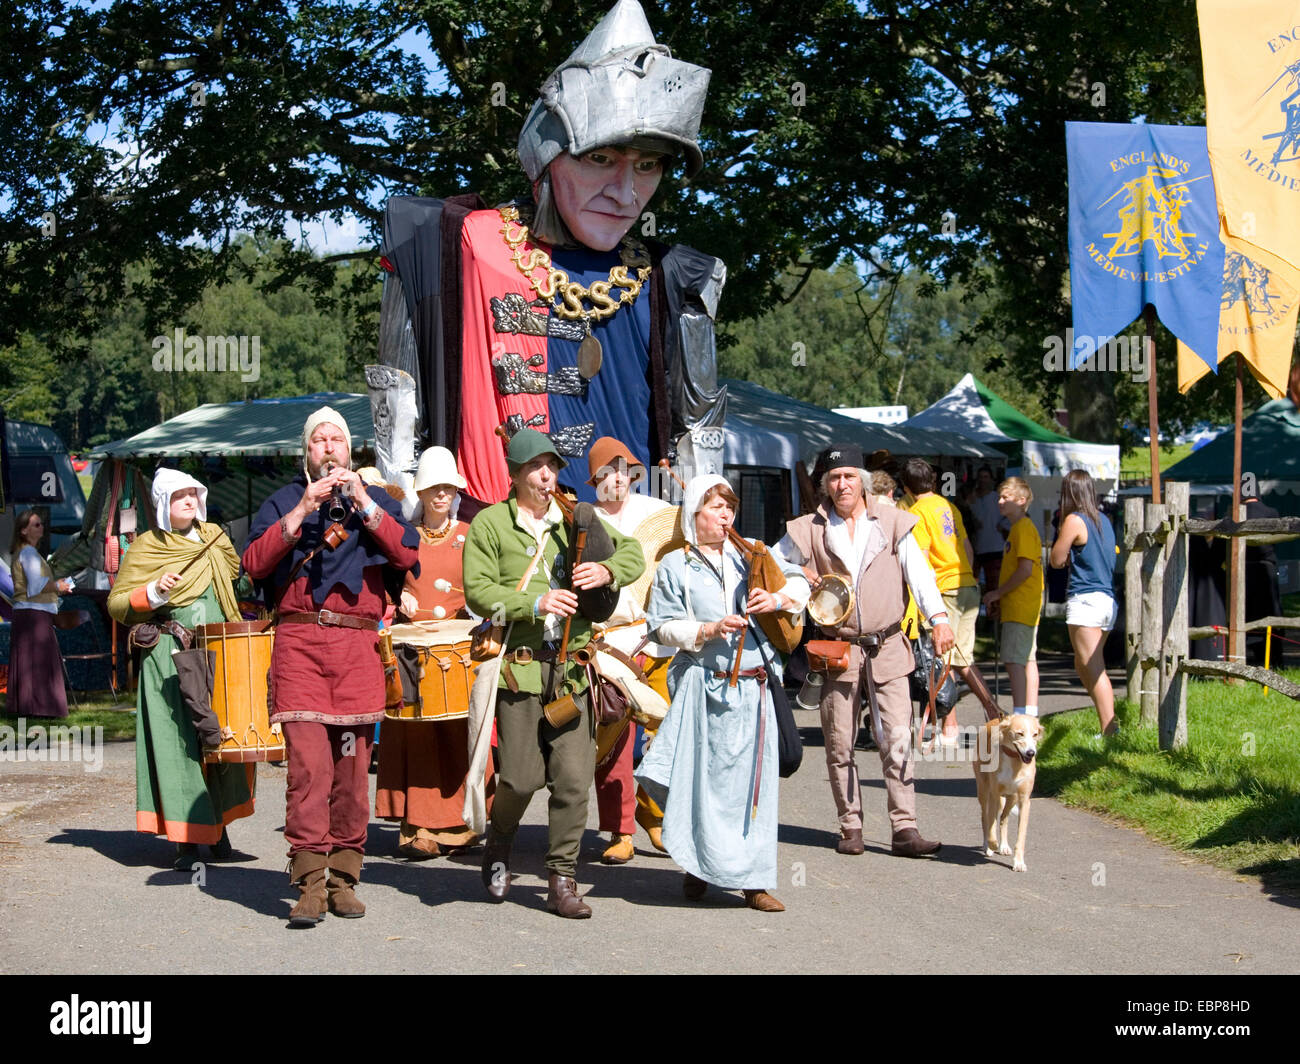 Herstmonceux, East Sussex, England. Musical troupe on parade at medieval festival in the grounds of Herstmonceux Castle. Stock Photo